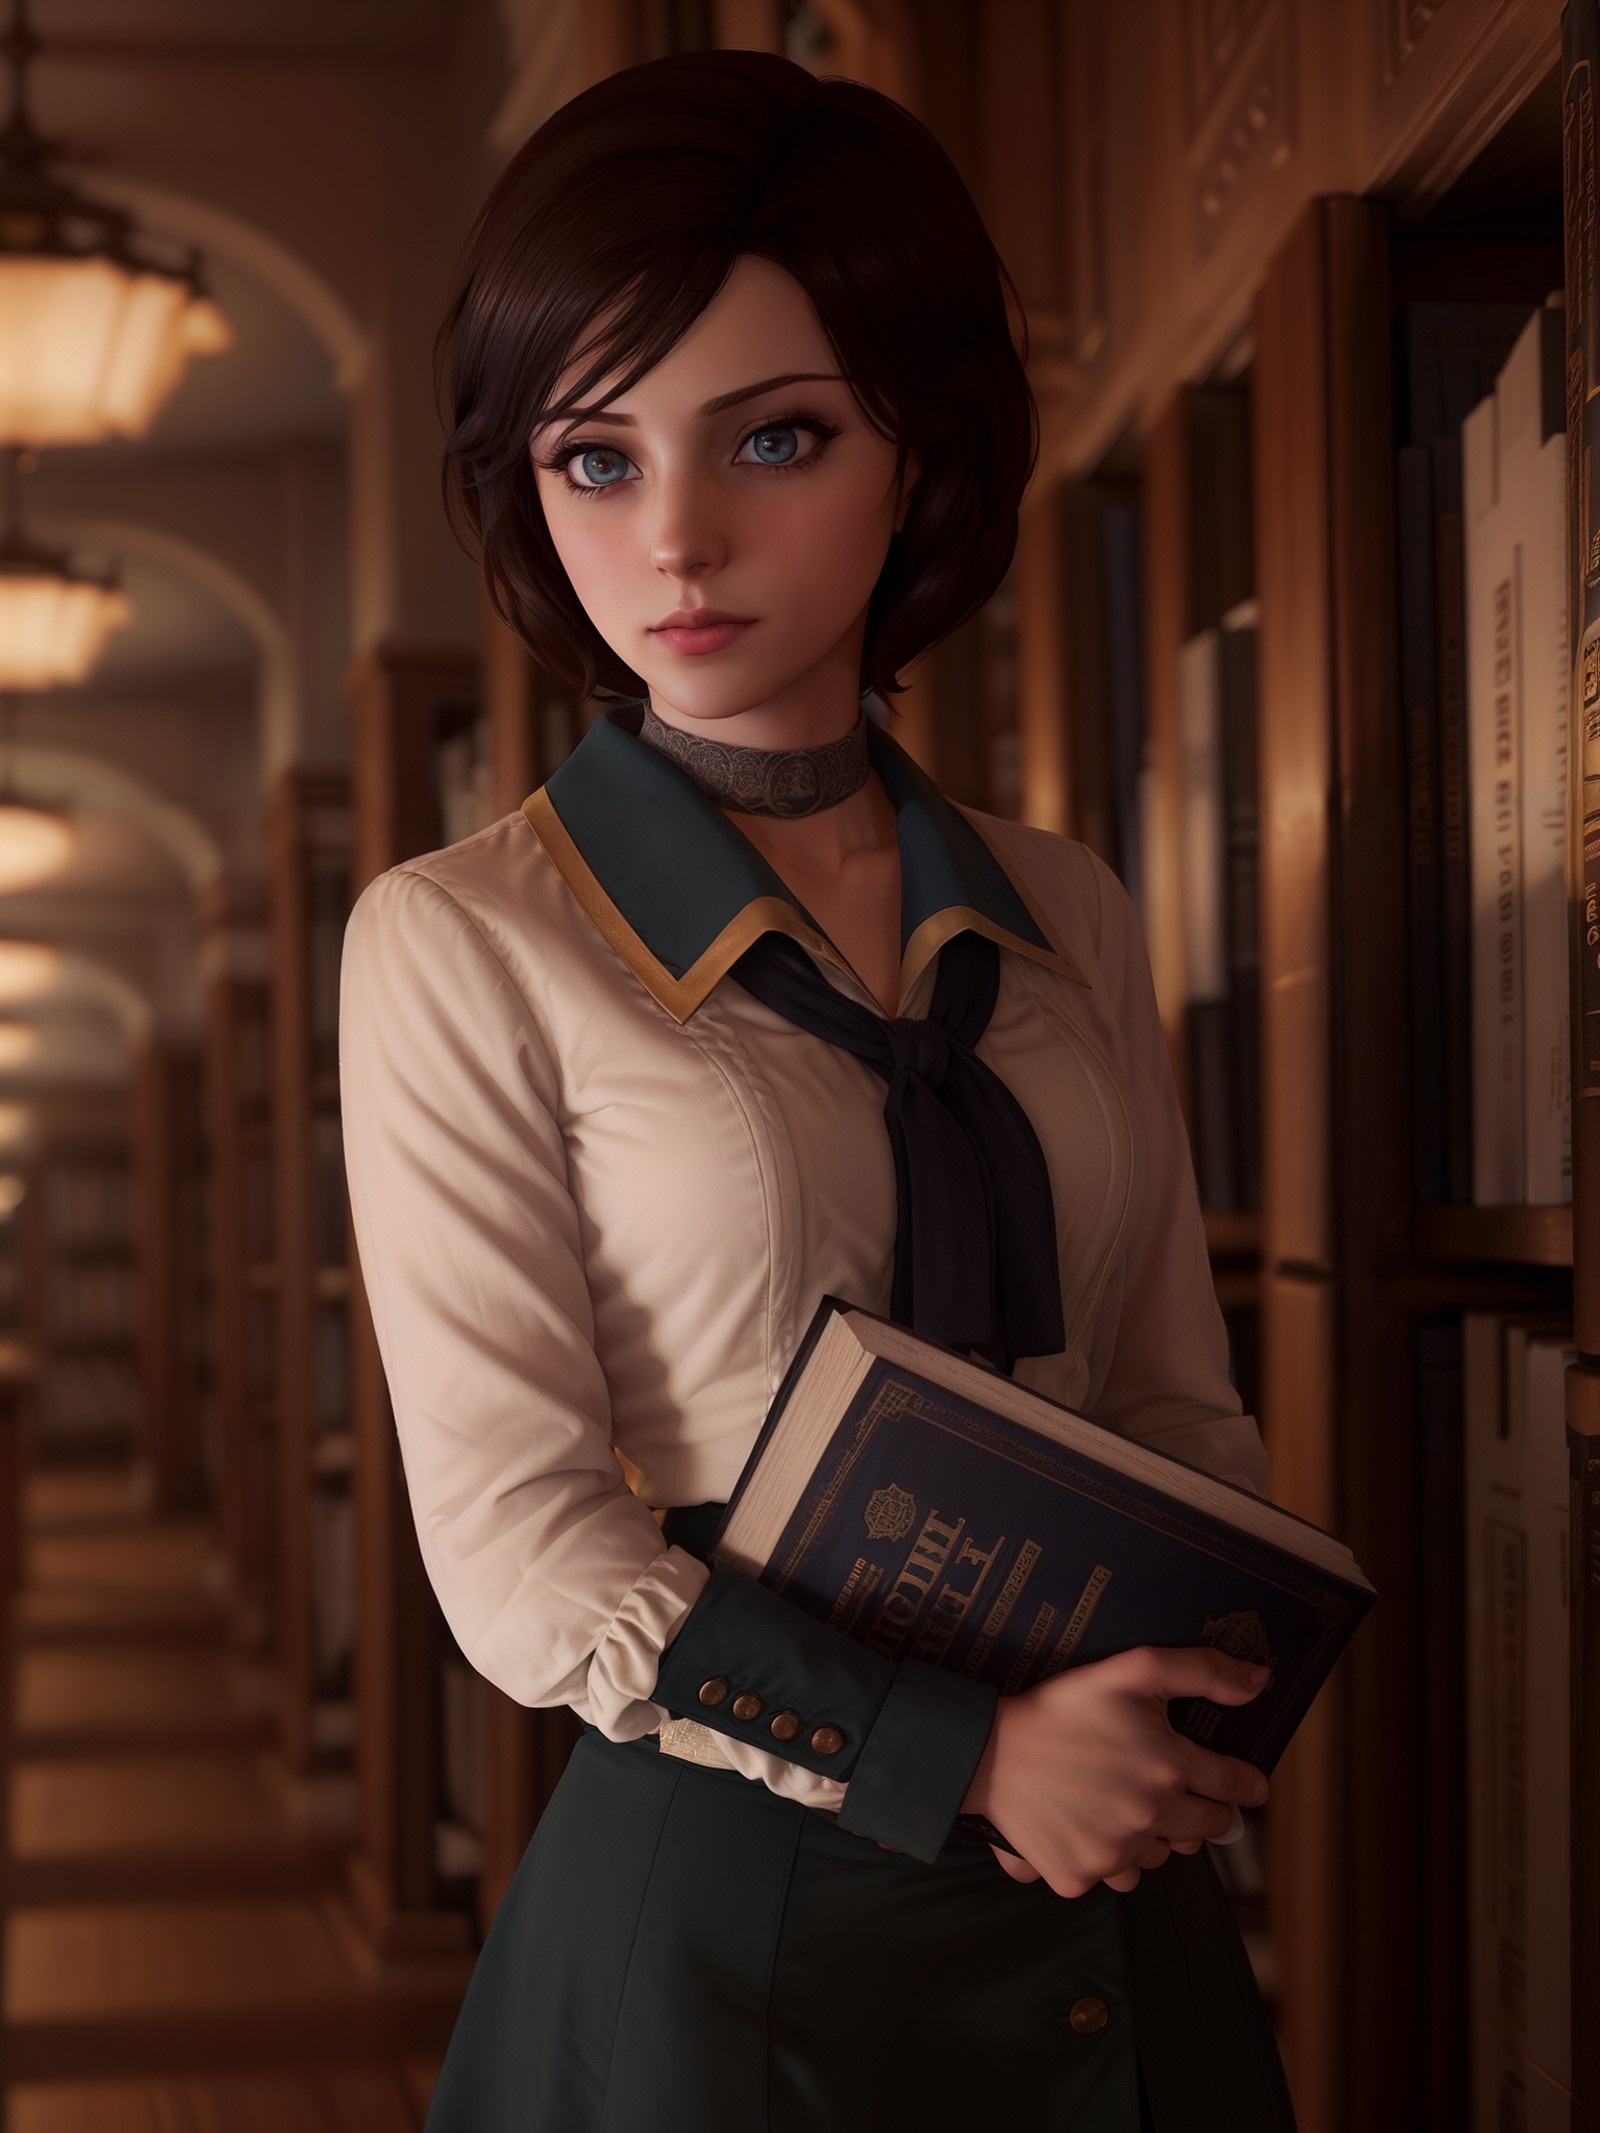 bioshockelizabeth standing in a library holding a book, cute face, dramatic lighting, wallpaper, intricate, sharp focus, r...